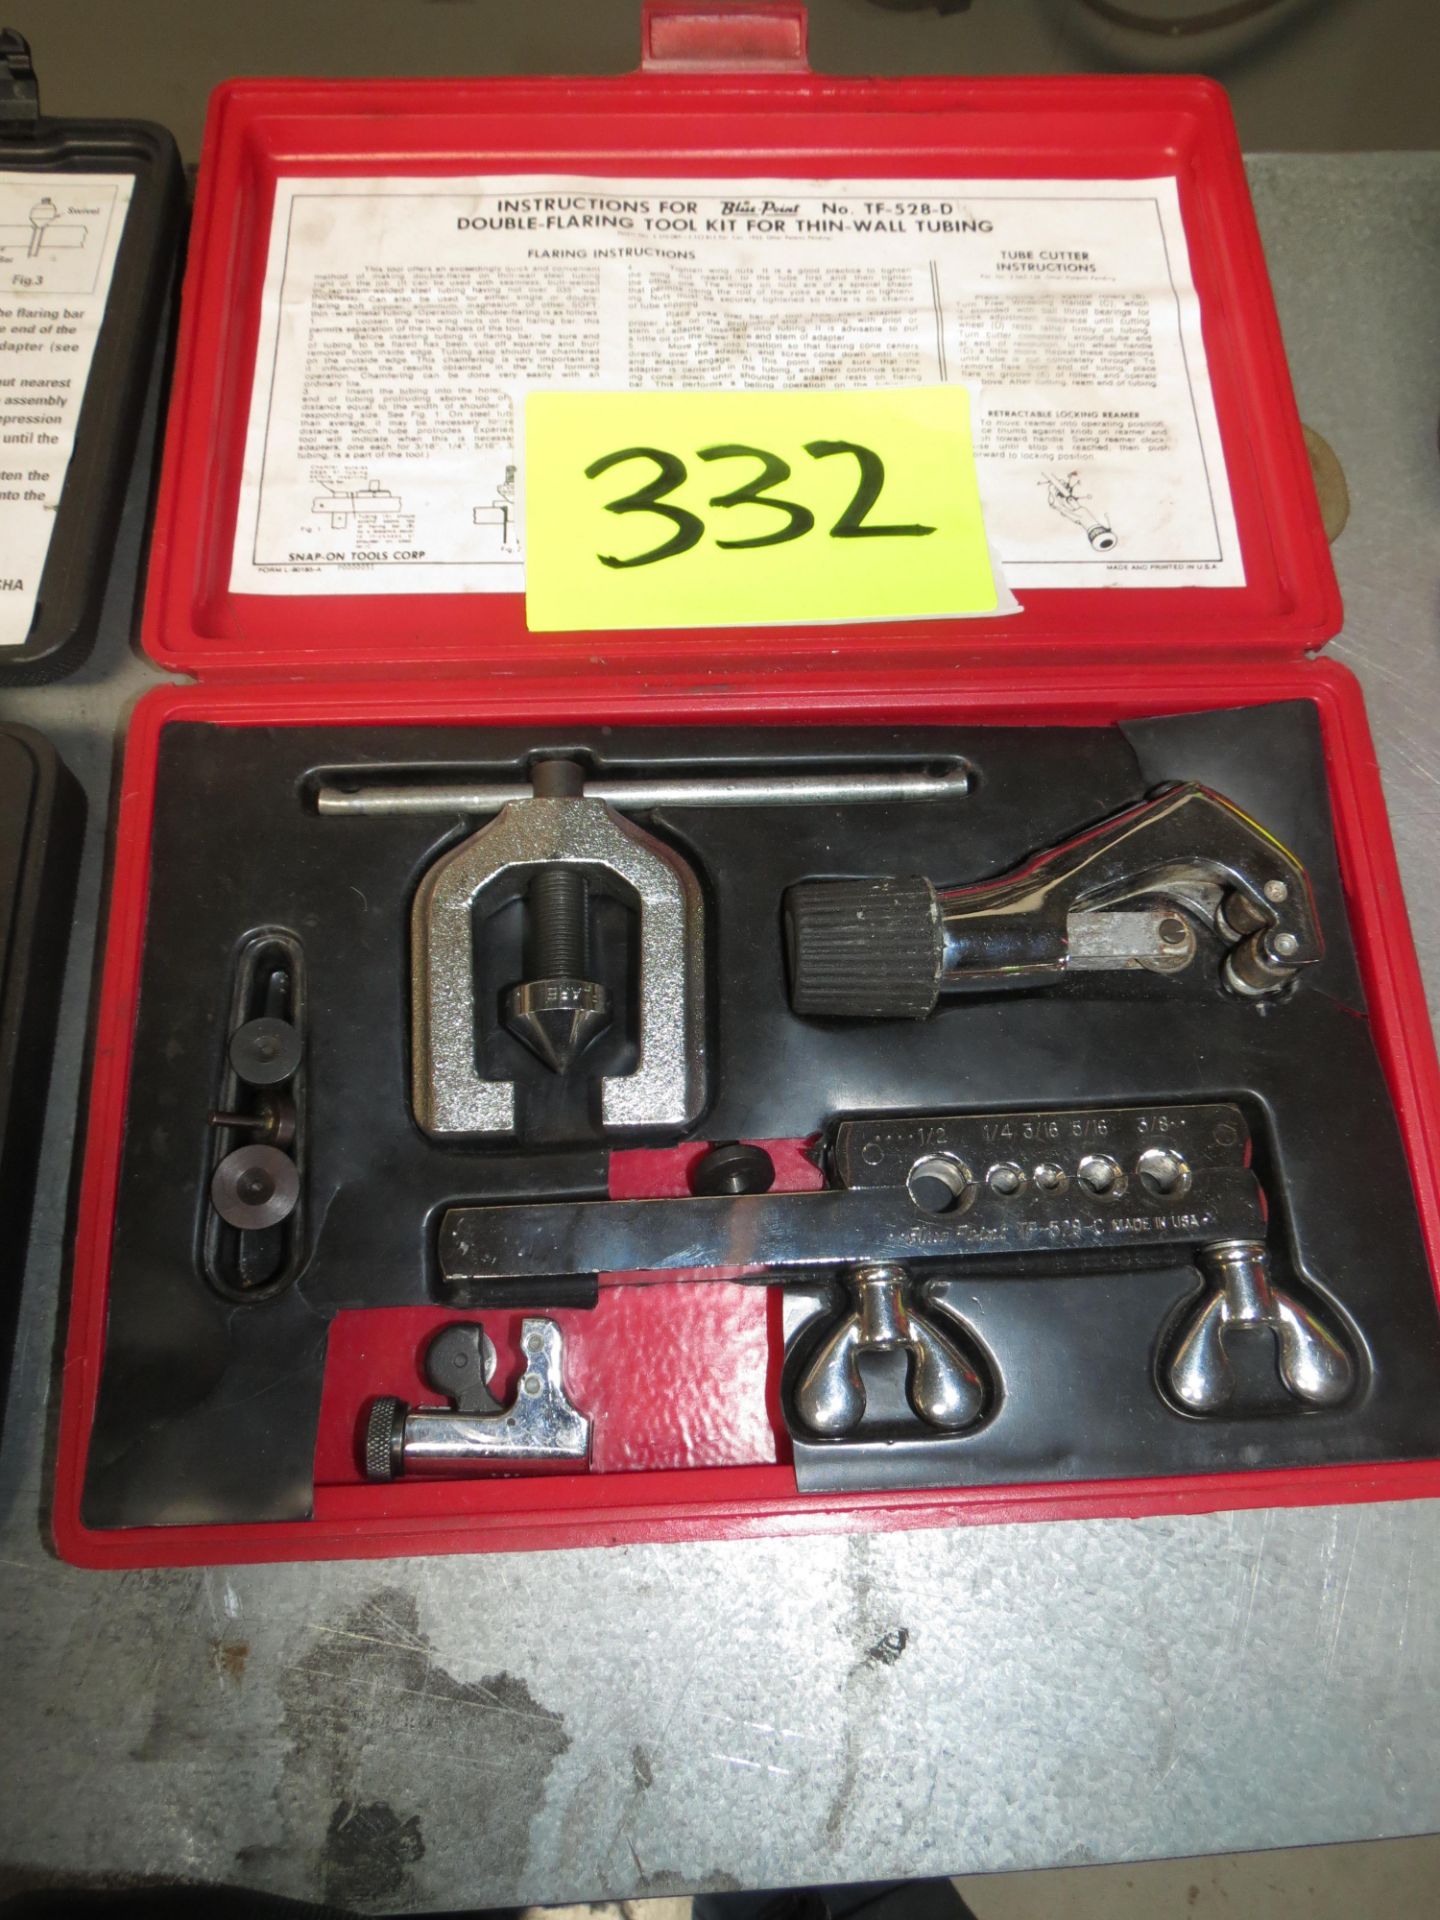 BLUE-POINT TF-528-D DOUBLE FLARE TOOL SET